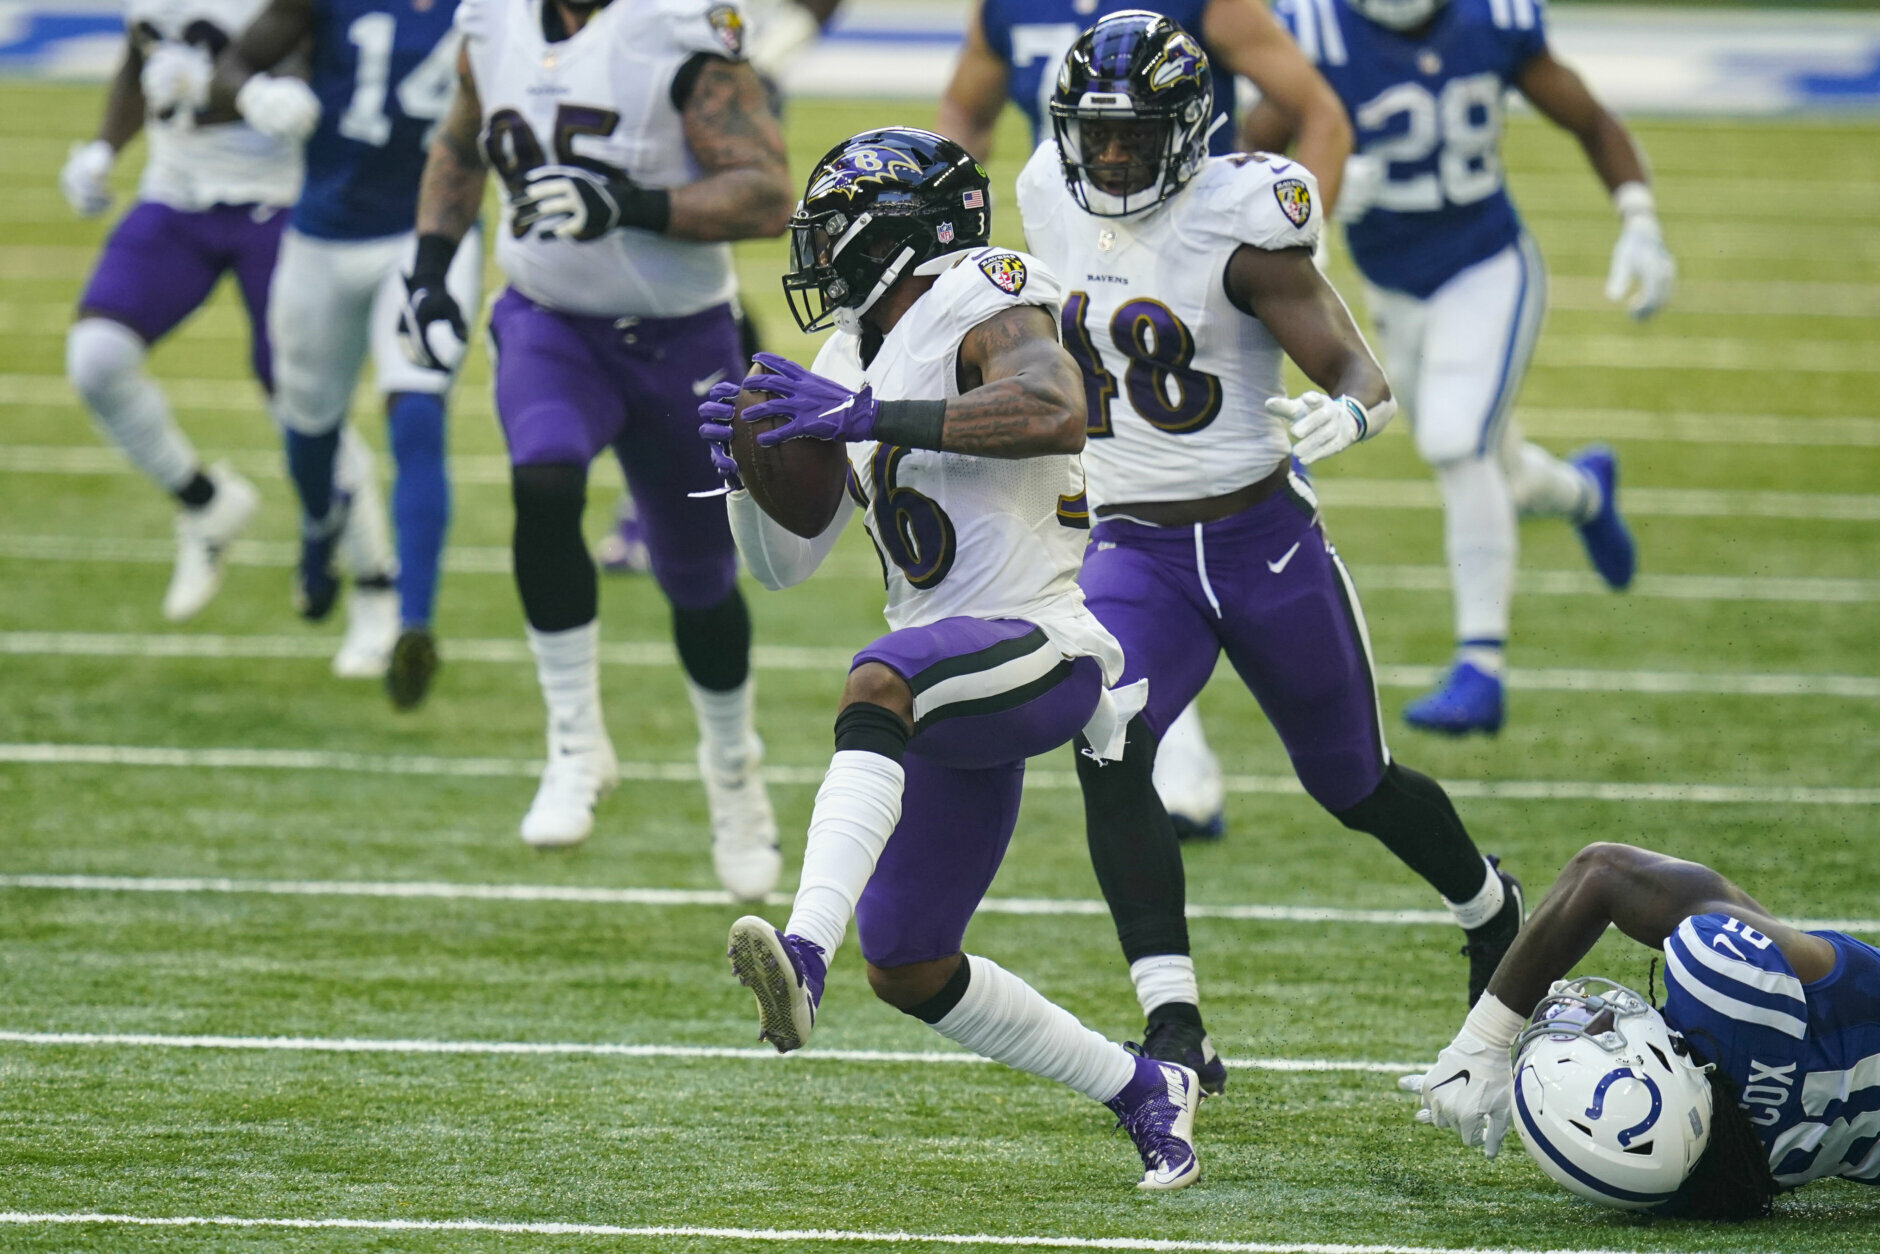 <p><b><i>Ravens 24</i></b><br />
<b><i>Colts 10</i></b></p>
<p>Ten straight road wins. A whopping 31 straight games scoring 20+ points and rushing for over 100 yards, 21 consecutive games with a takeaway and an NFL-best 12th defensive touchdown since 2018. <a href="https://profootballtalk.nbcsports.com/2020/11/02/lamar-jacksons-stats-have-declined-significantly-from-mvp-season/">Lamar Jackson slumping</a> but also <a href="https://www.espn.com/nfl/story/_/id/30280282/baltimore-ravens-qb-lamar-jackson-25-5-ties-dan-marino-best-start-quarterback">etching his name alongside Dan Marino&#8217;s</a>. Has any team been as simultaneously impressive and underwhelming as Baltimore?</p>
